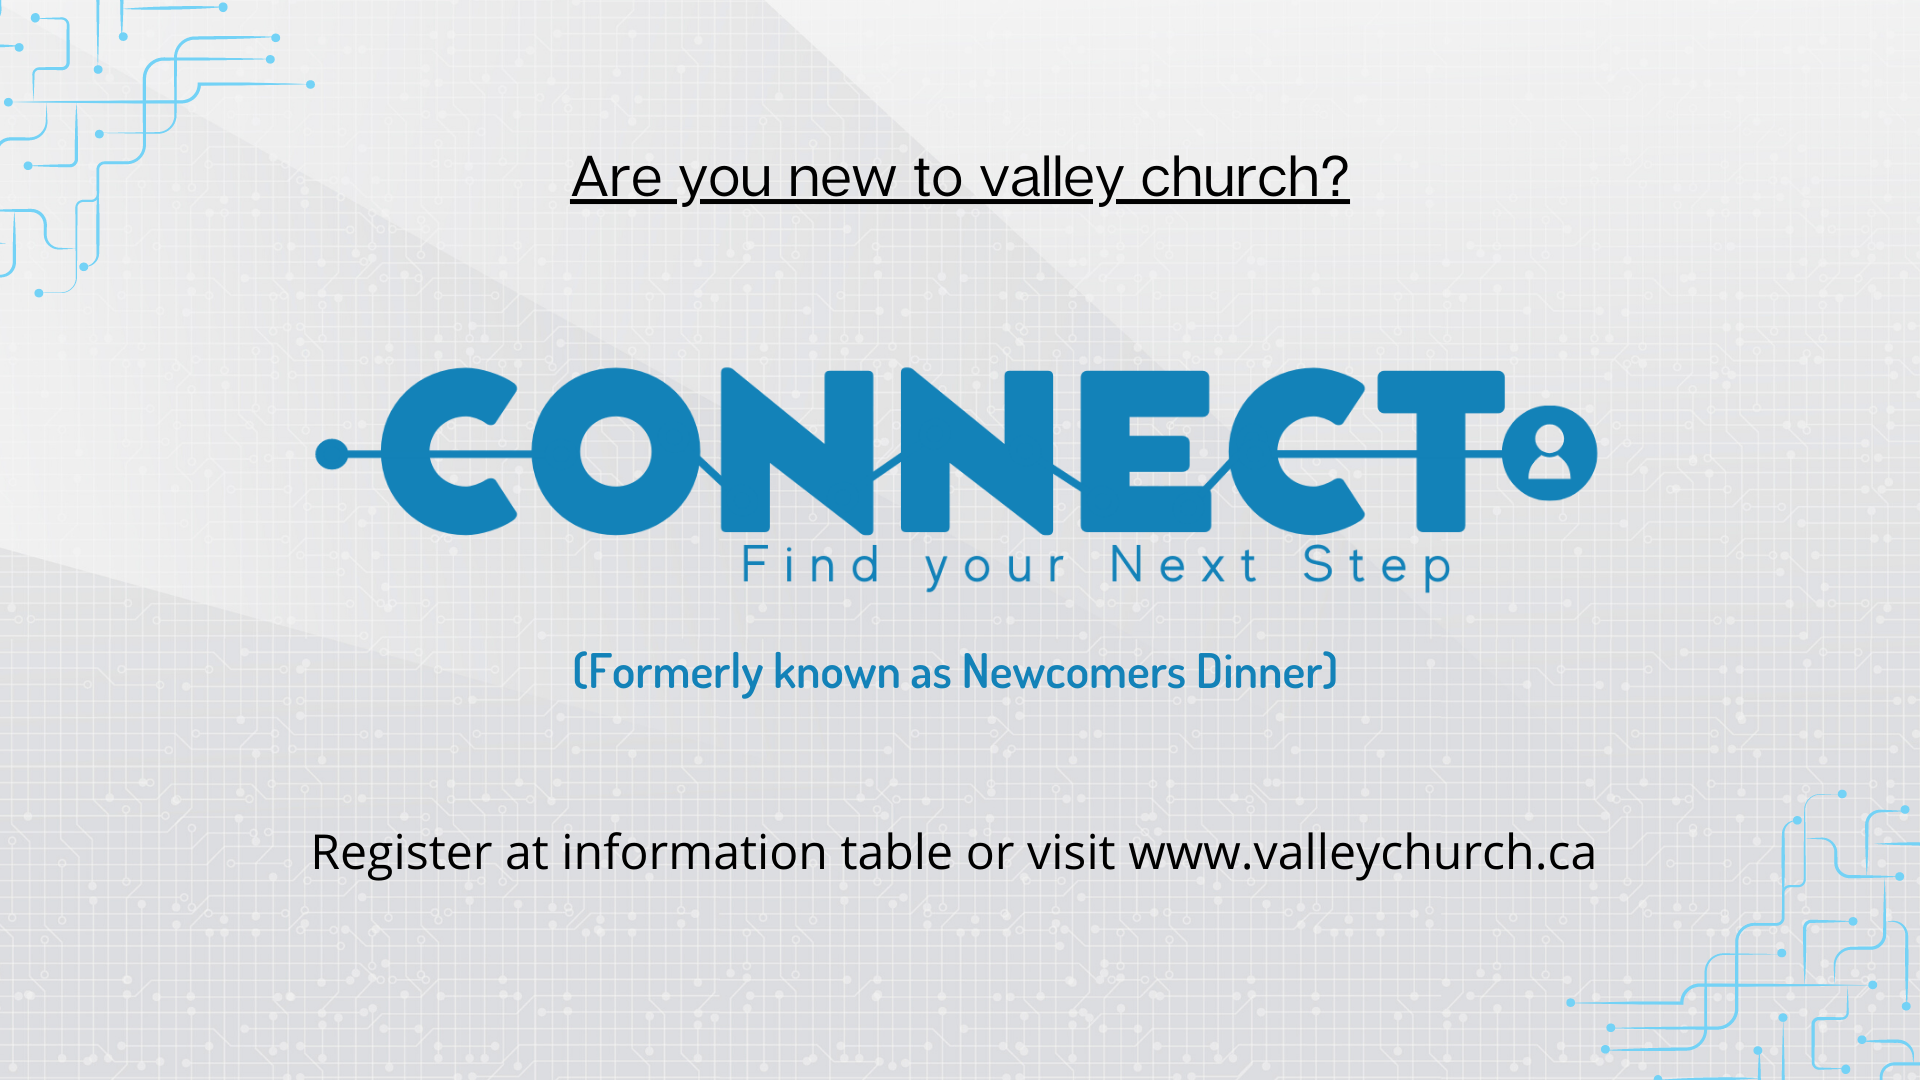 Connect: Find Your Next Step